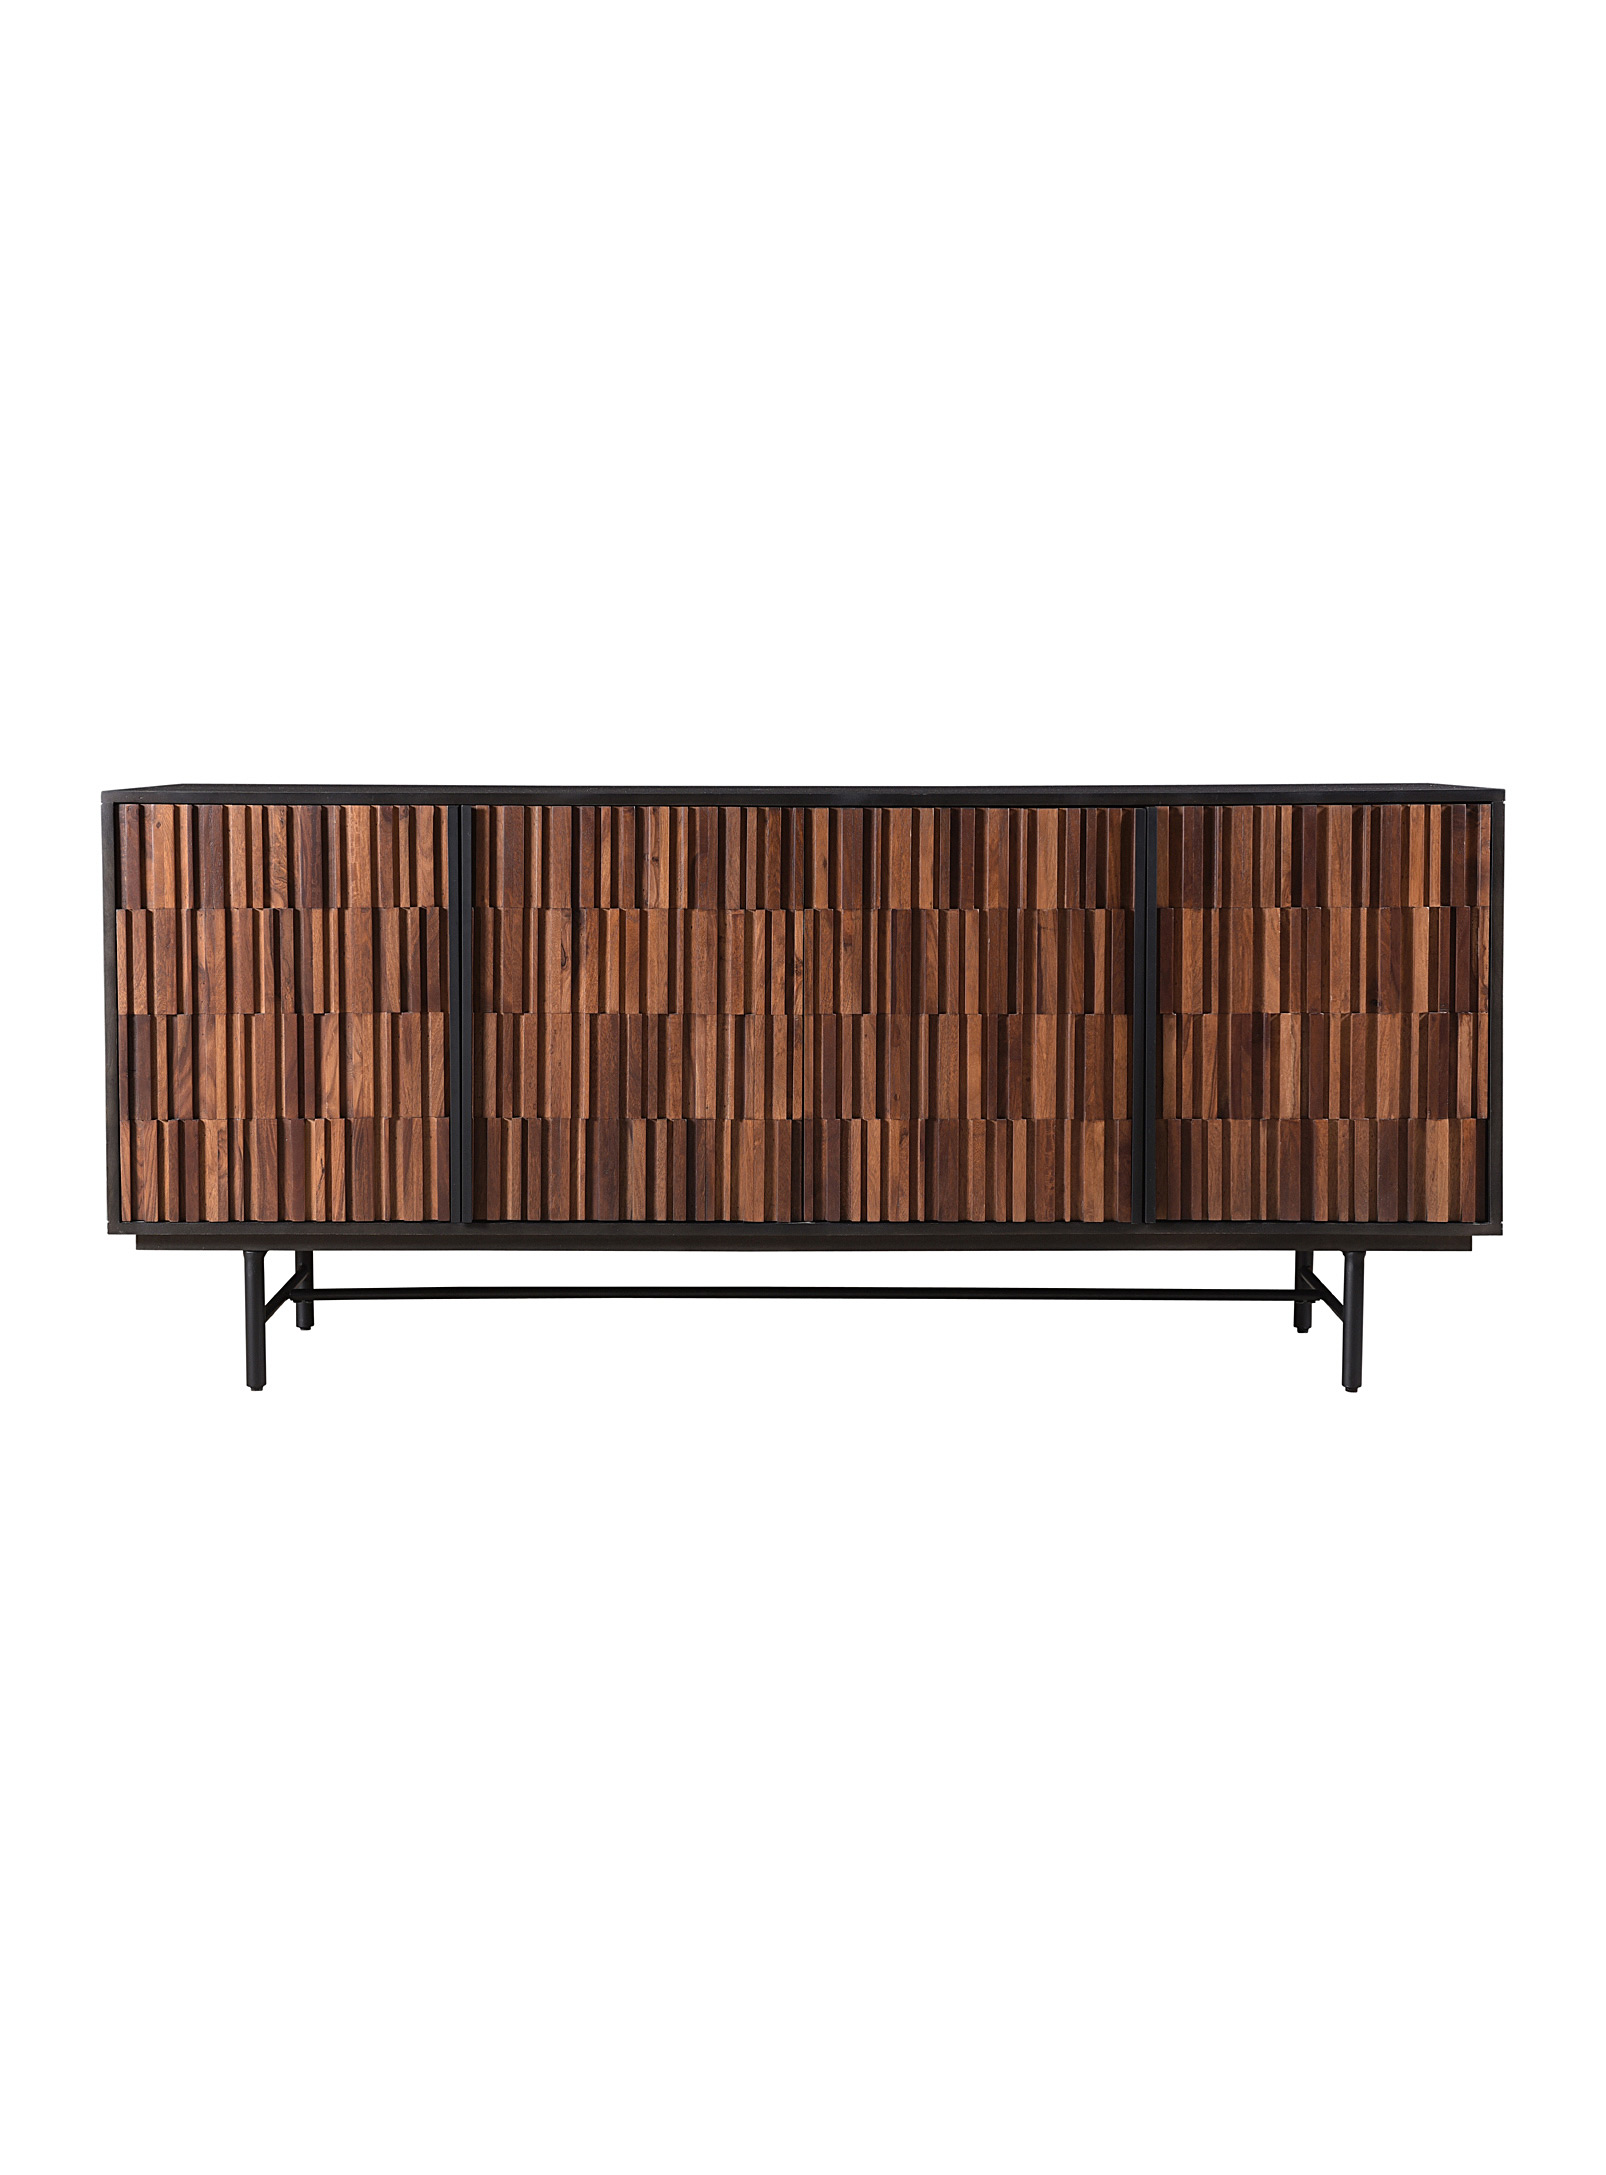 Moe's Home Collection - Jackson rosewood and mango wood sideboard